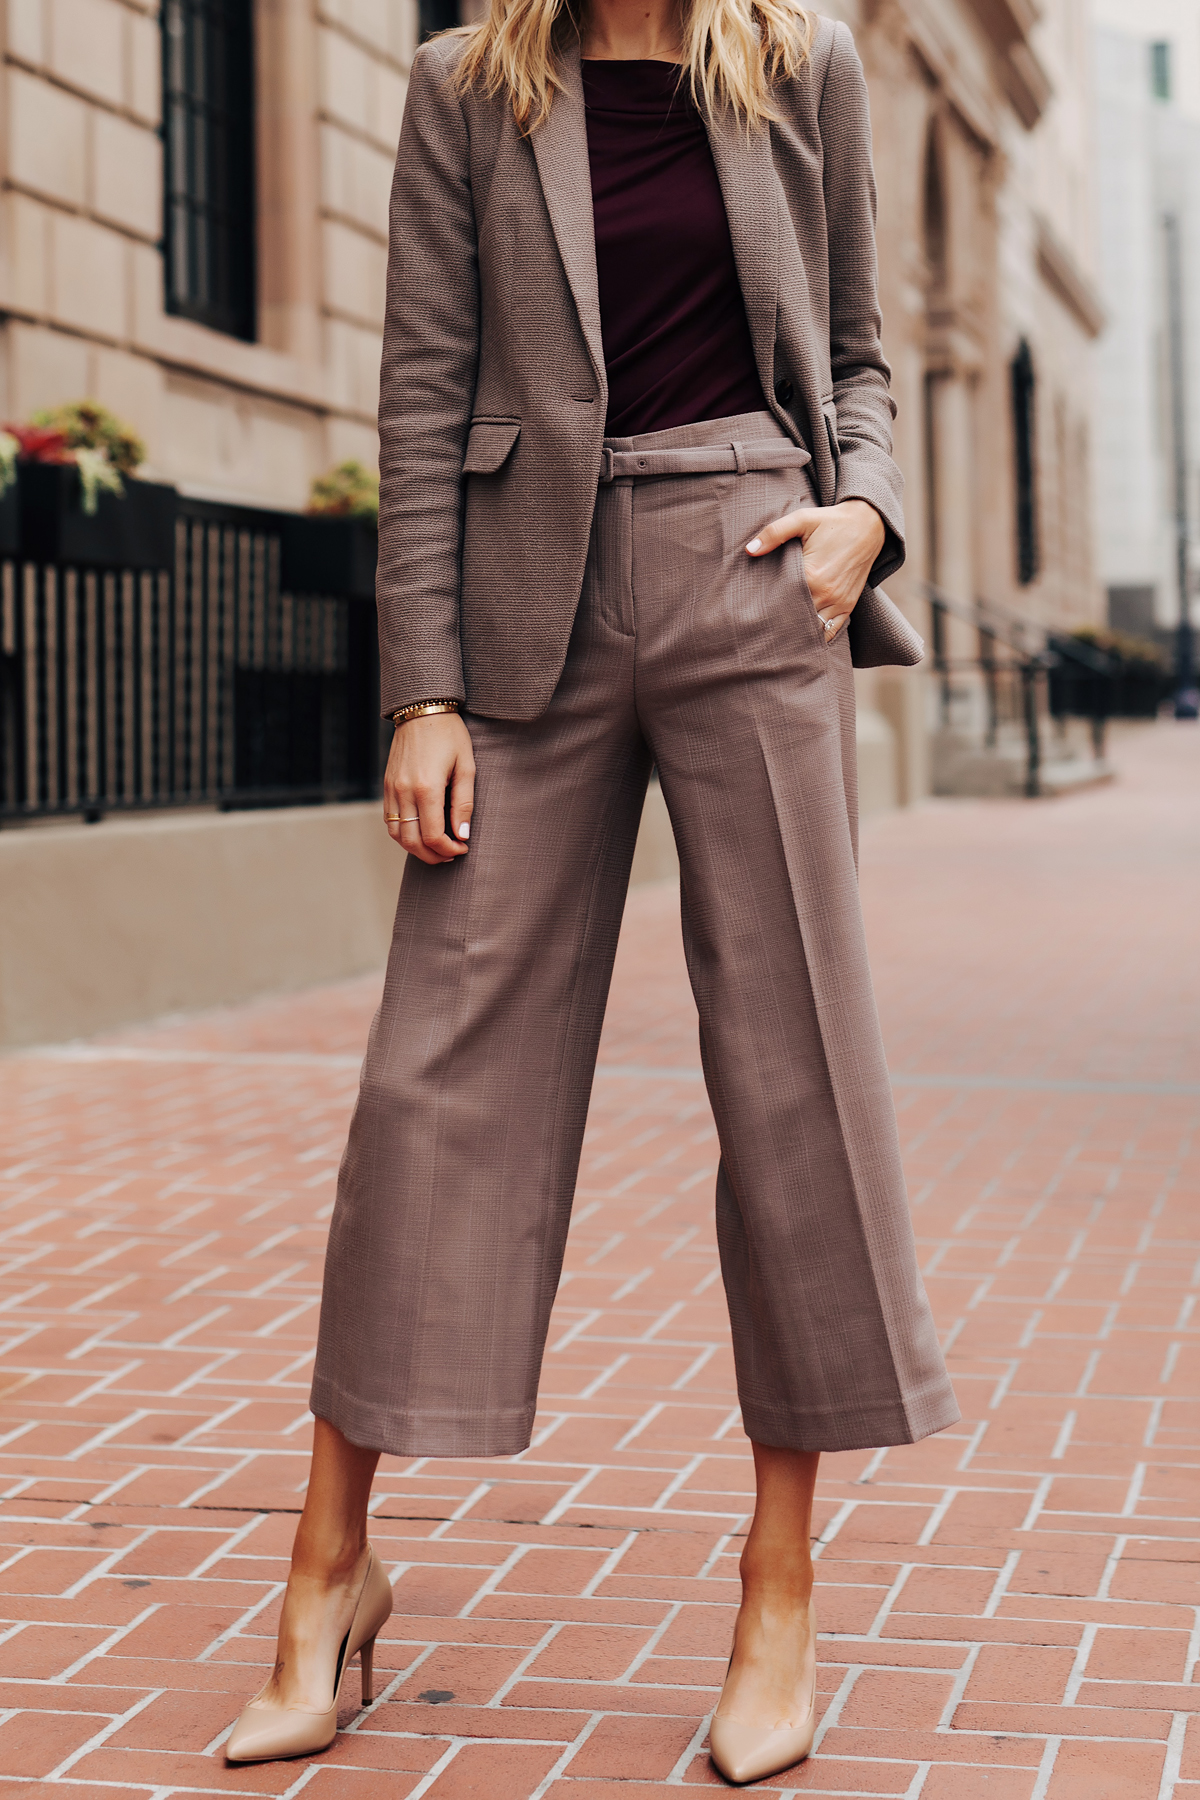 Fashion Jackson Wearing Ann Taylor Taupe Blazer Purple Top Taupe Wide Leg Cropped Pants Nude Pumps Fall Workwear Outfit